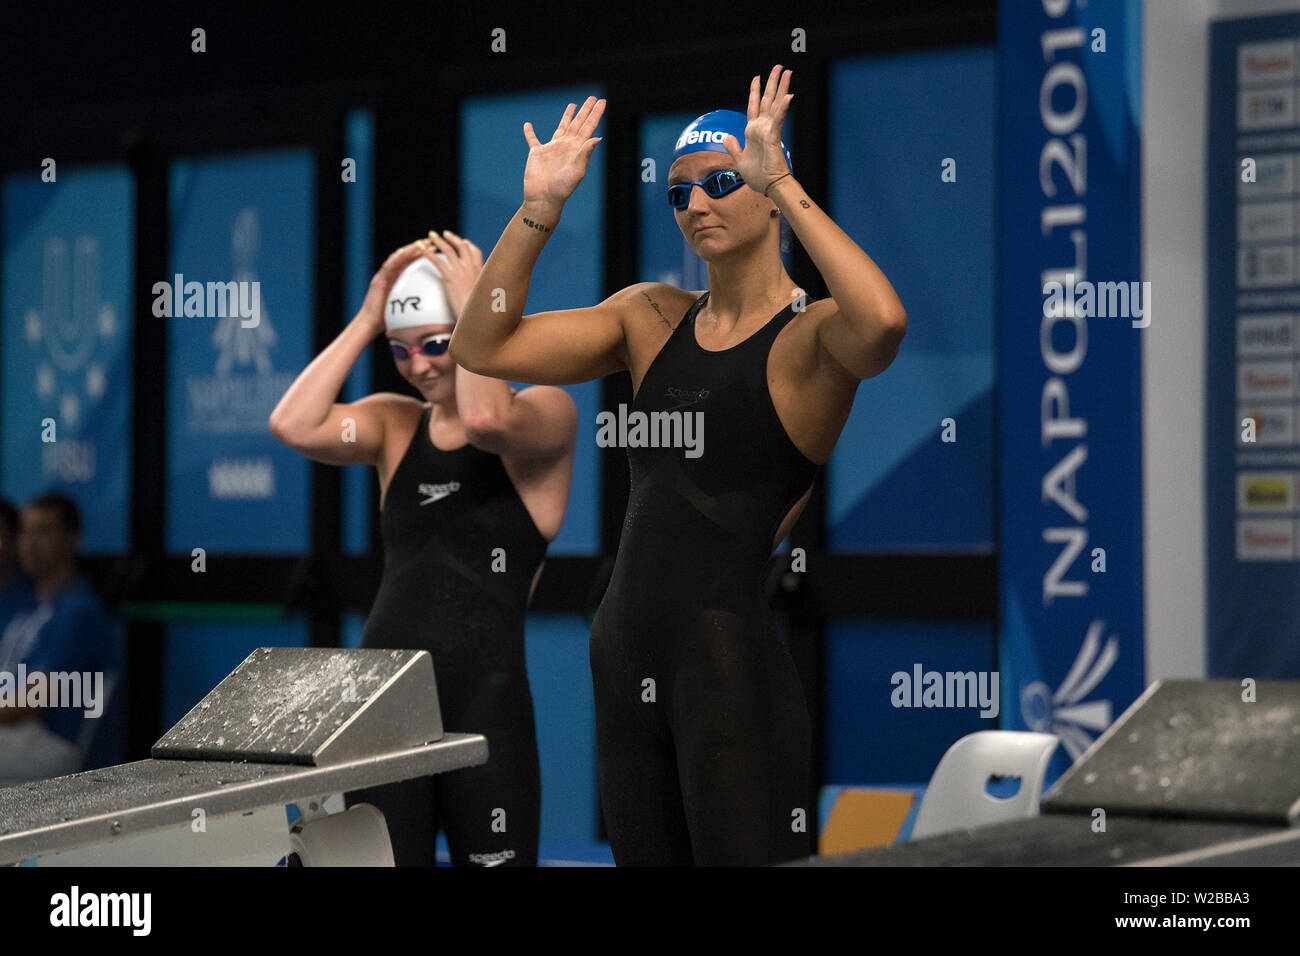 Naples, Italy. 06th July, 2019. Fourth day of Swimming at the Scandone Pool 200m Butterfly M Individual 200m, 200m Breaststroke M 100m Breaststroke, W50 Breaststroke M1500m Freestyle. Credit: Massimo Solimene/Pacific Press/Alamy Live News Stock Photo